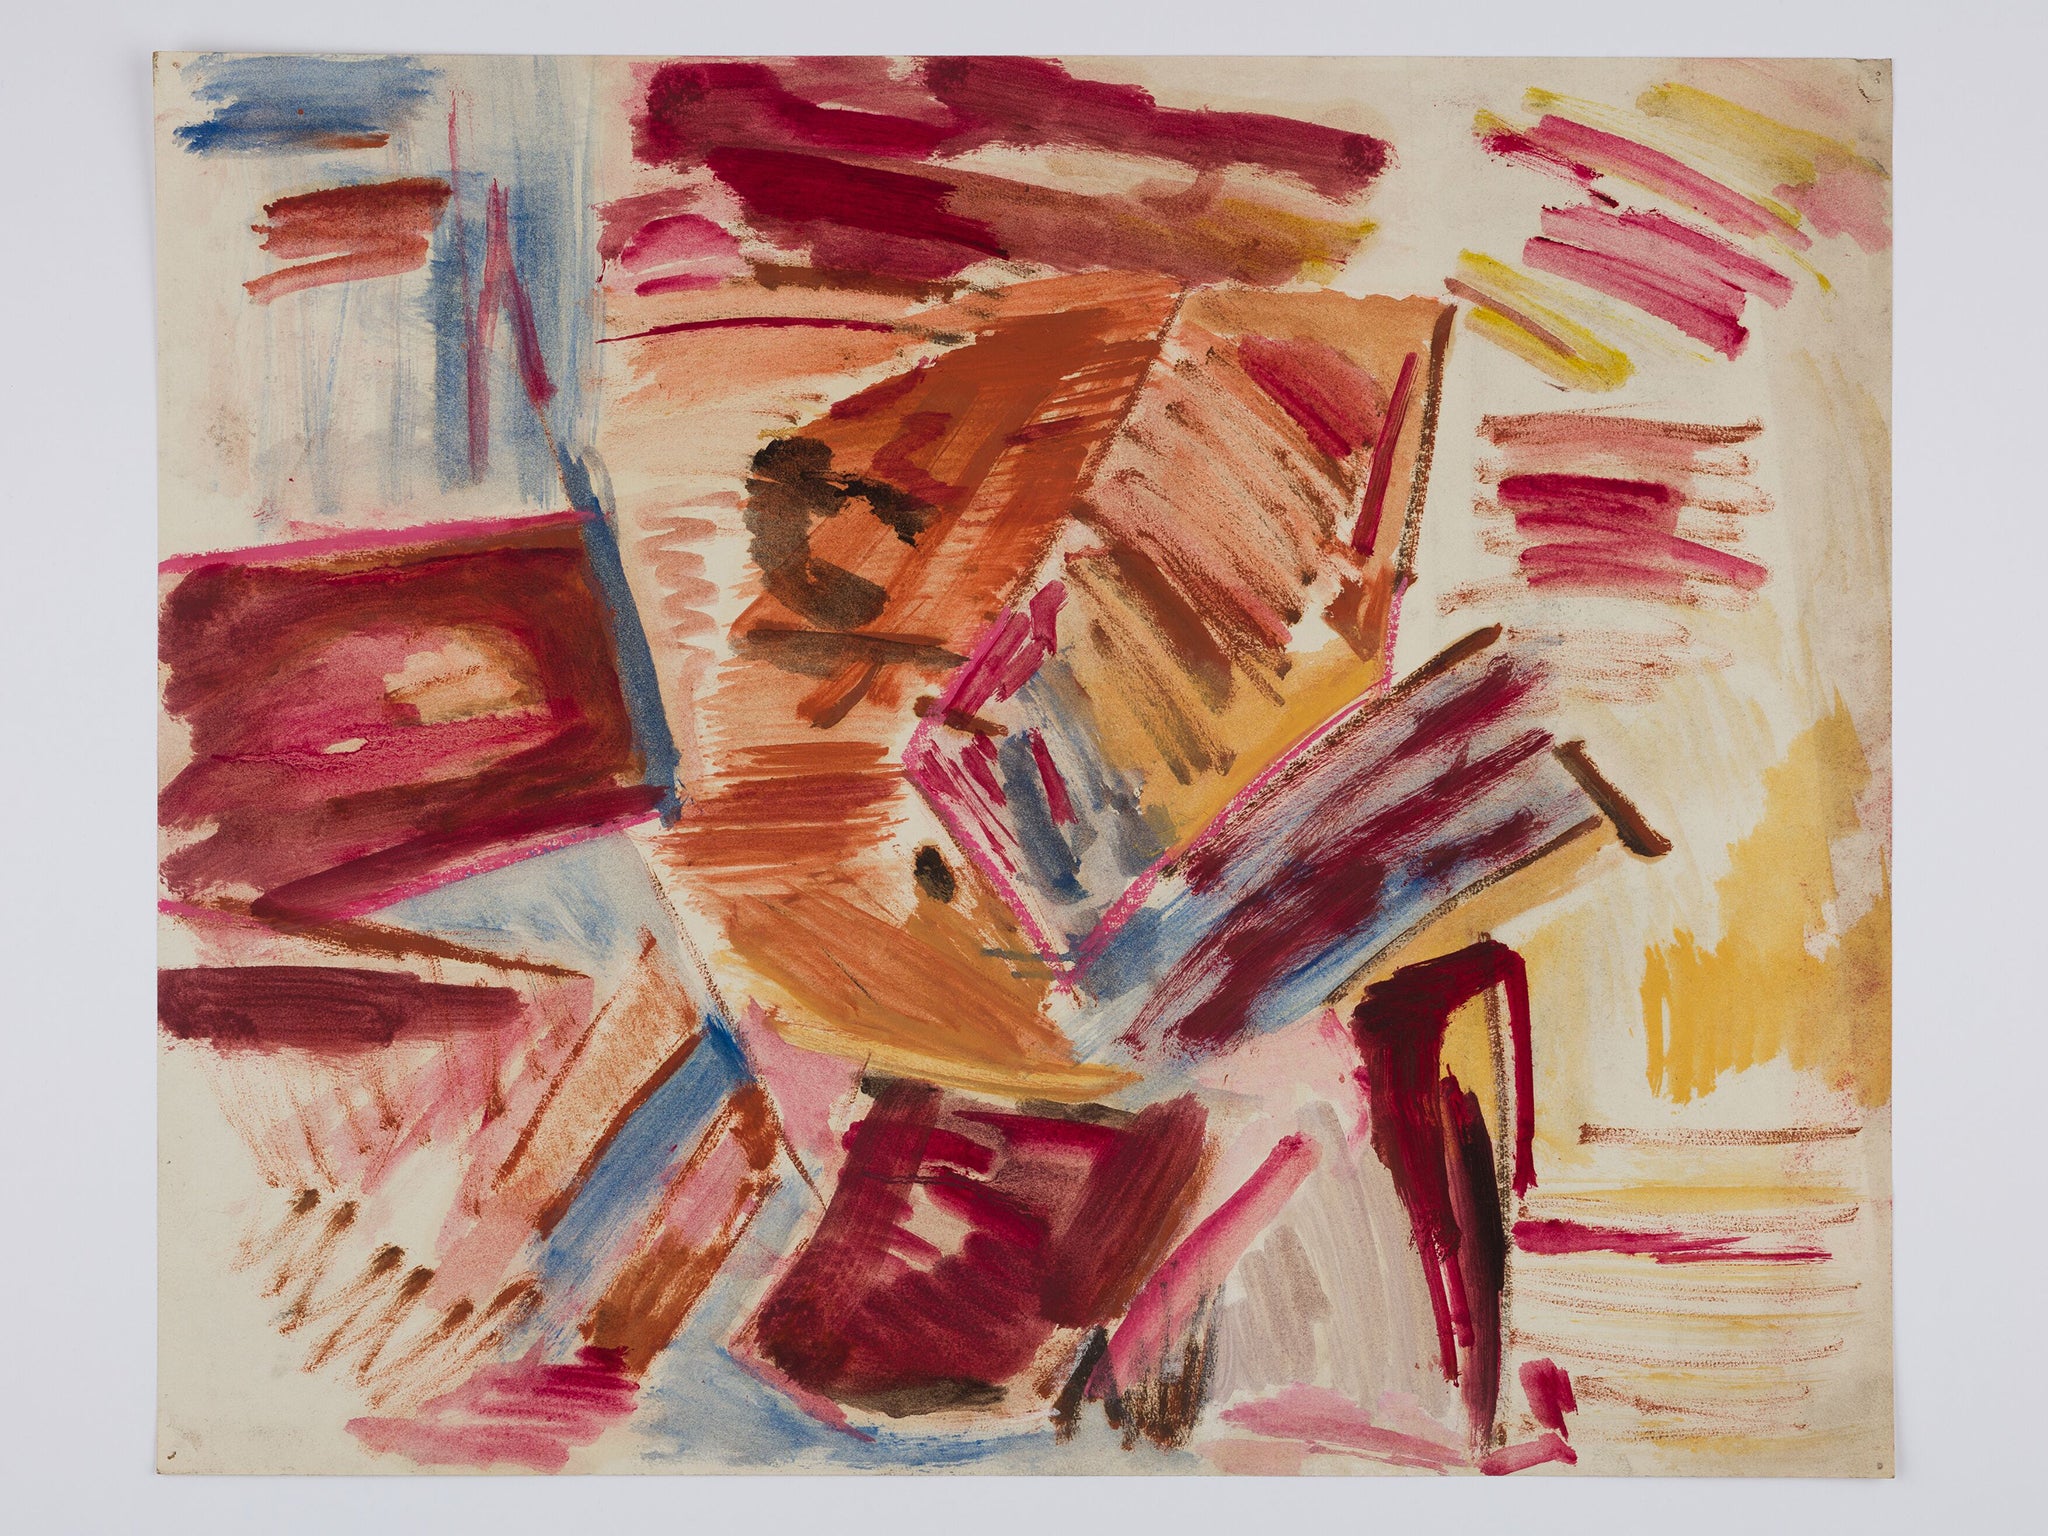 ‘Untitled’ (1958-59): Metzger’s opposition to nuclear weapons was informed by his experience of the Holocaust